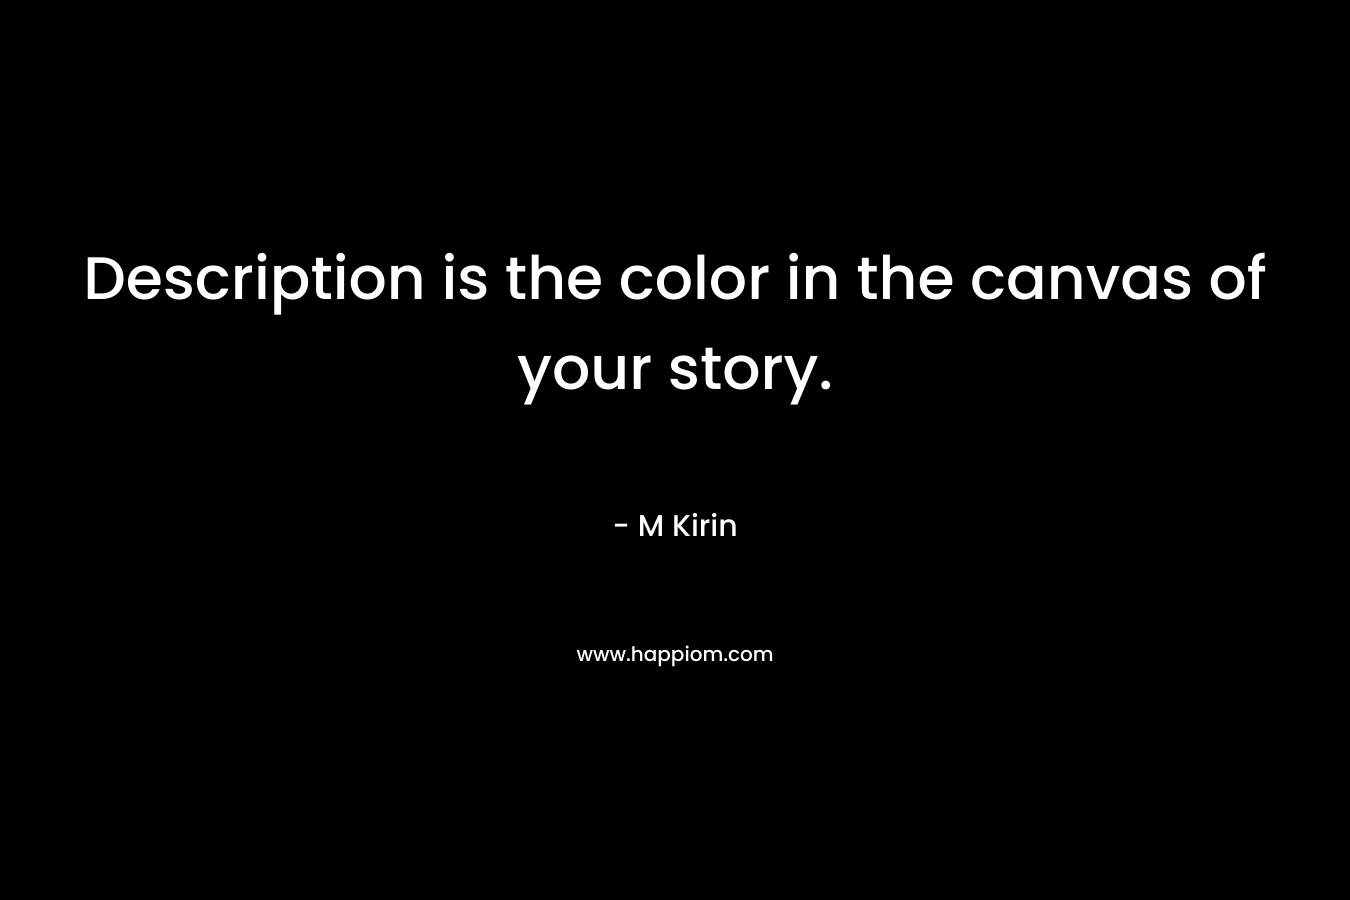 Description is the color in the canvas of your story. – M Kirin